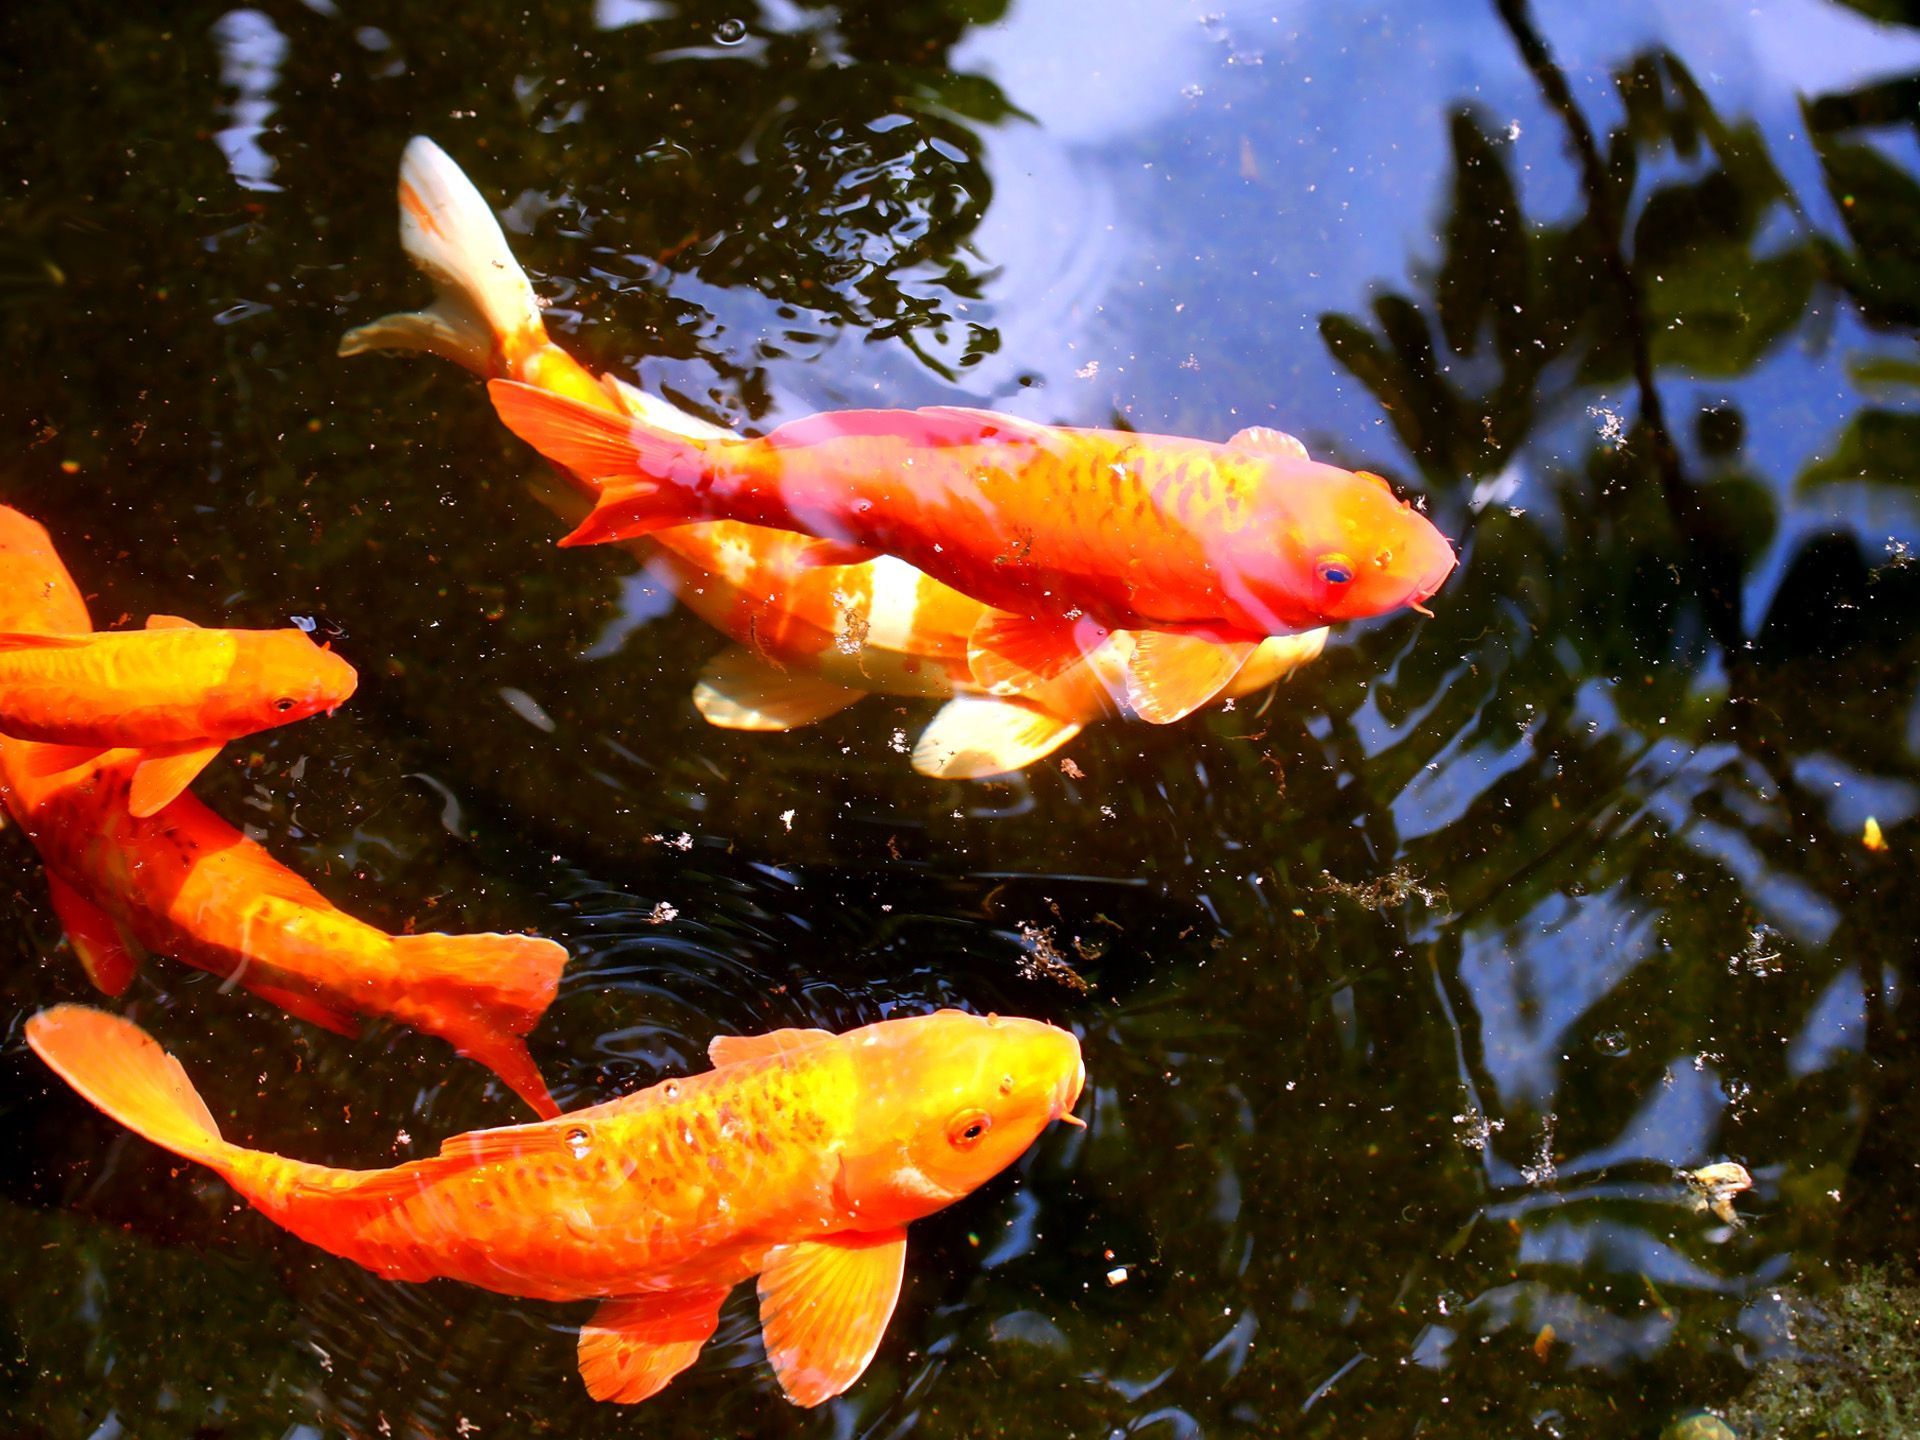 A group of orange and pink koi fish swimming in a pond - Koi fish, fish